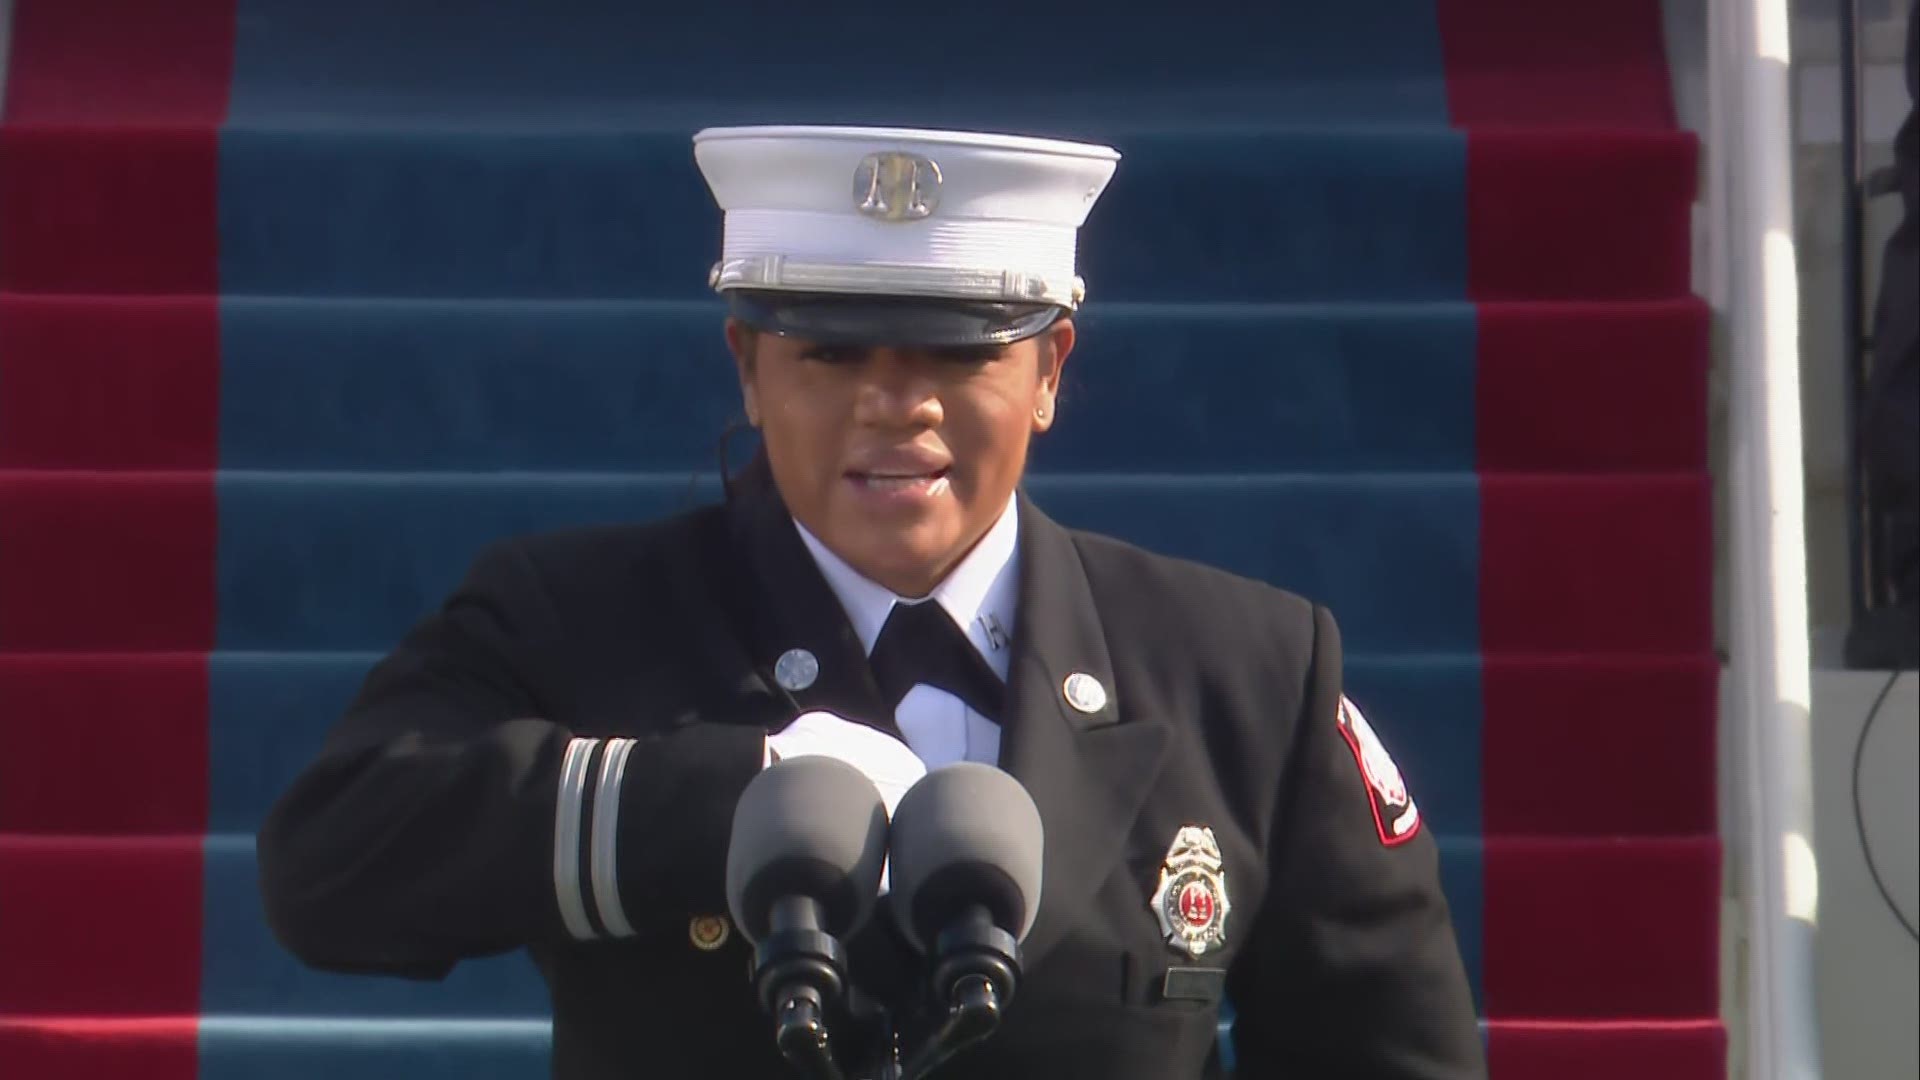 Fire Captain Andrea M. Hall said and signed the Pledge of Allegiance in American Sign Language during the inauguration of Joe Bide.